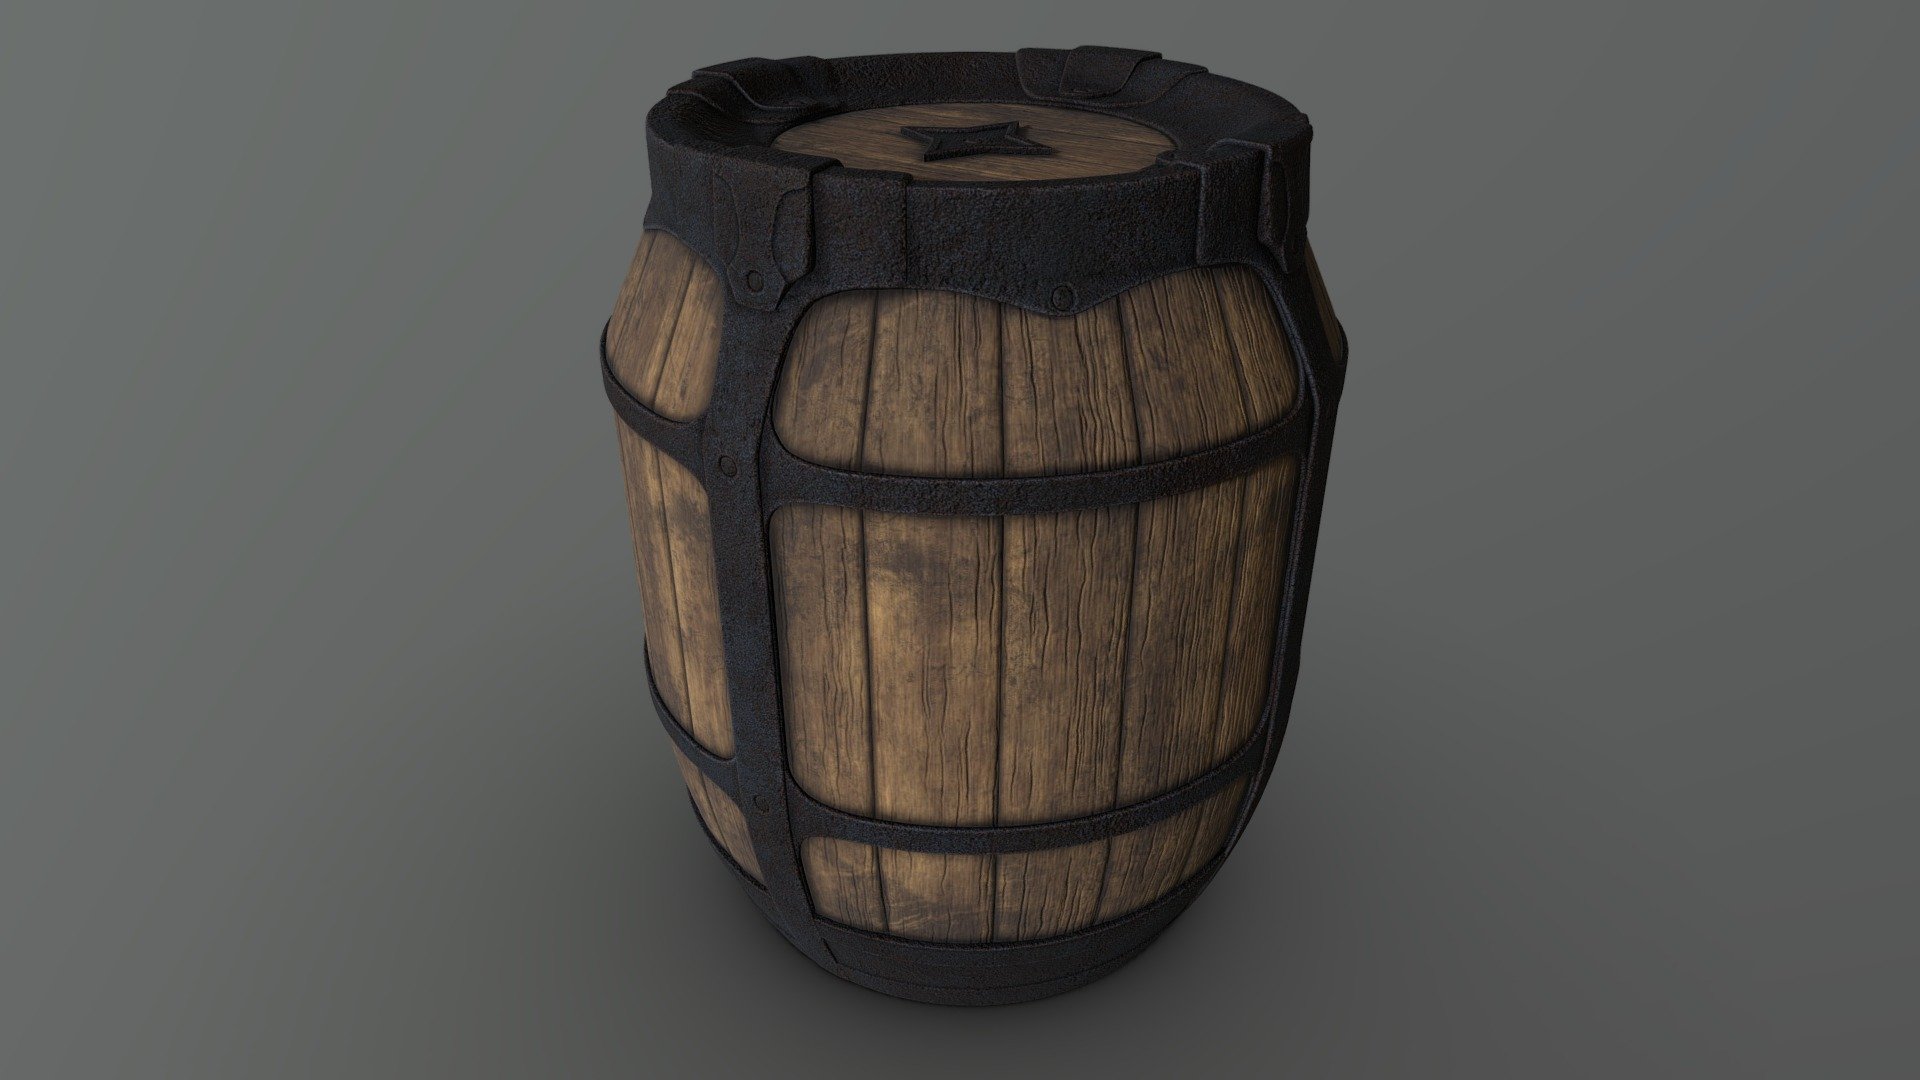 Barrel created with tutorial from https://www.youtube.com/watch?v=W6qI6tQn5DQ

Arrimus 3D  https://www.youtube.com/channel/UCSLLdTBwLMfTKWS56tOiQpw

Great place to watch and learn 3d modeling 3d model